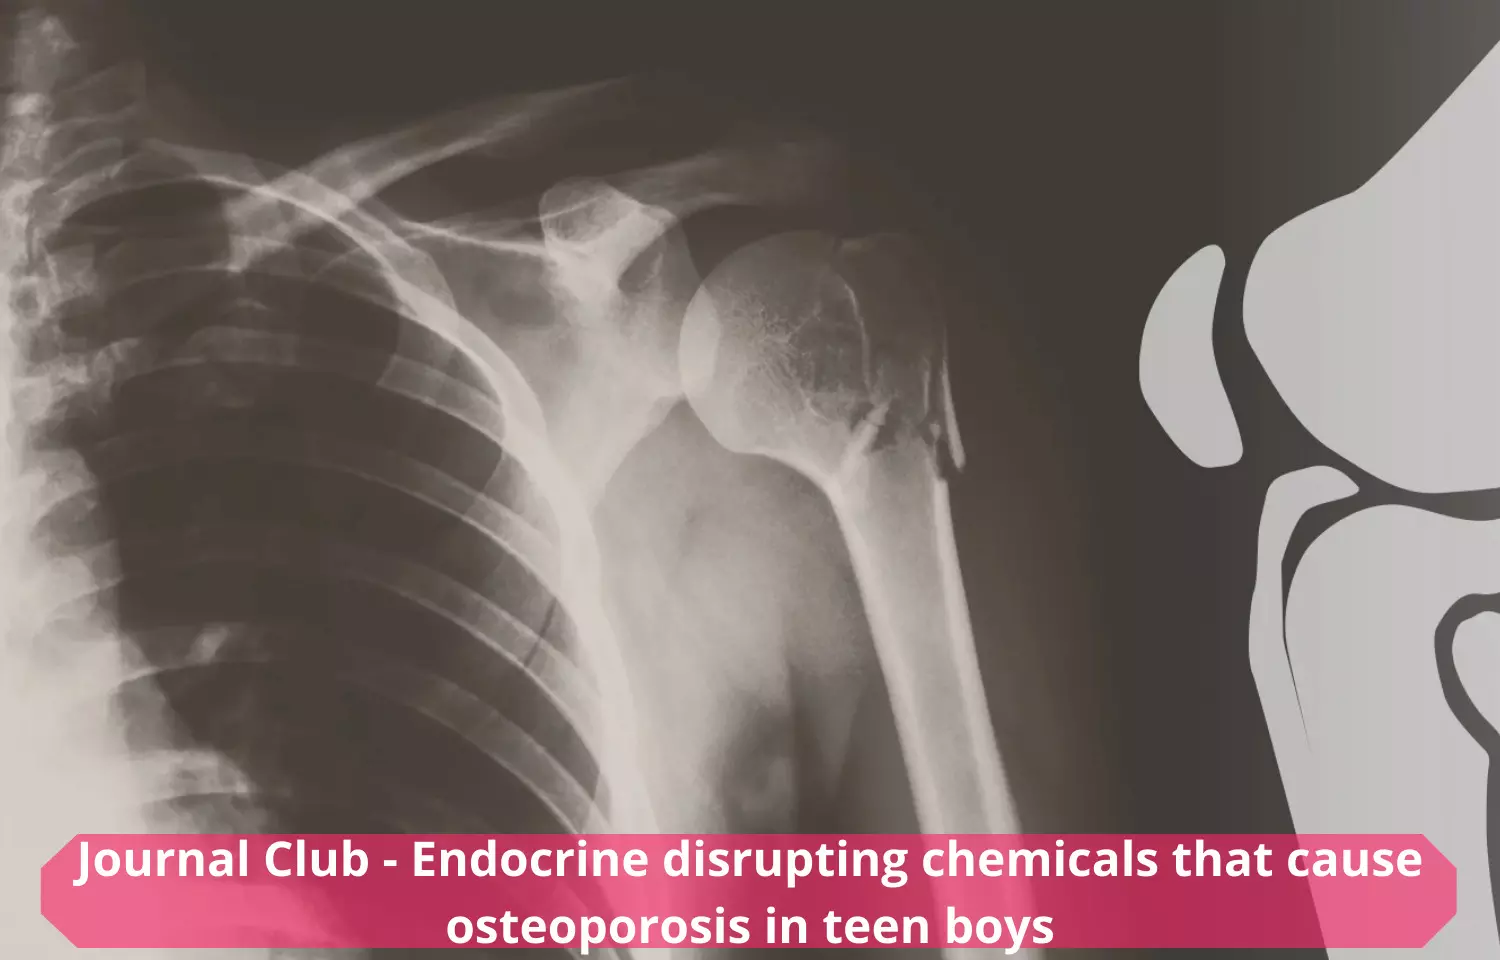 Journal Club - Endocrine disrupting chemicals that cause osteoporosis in teen boys